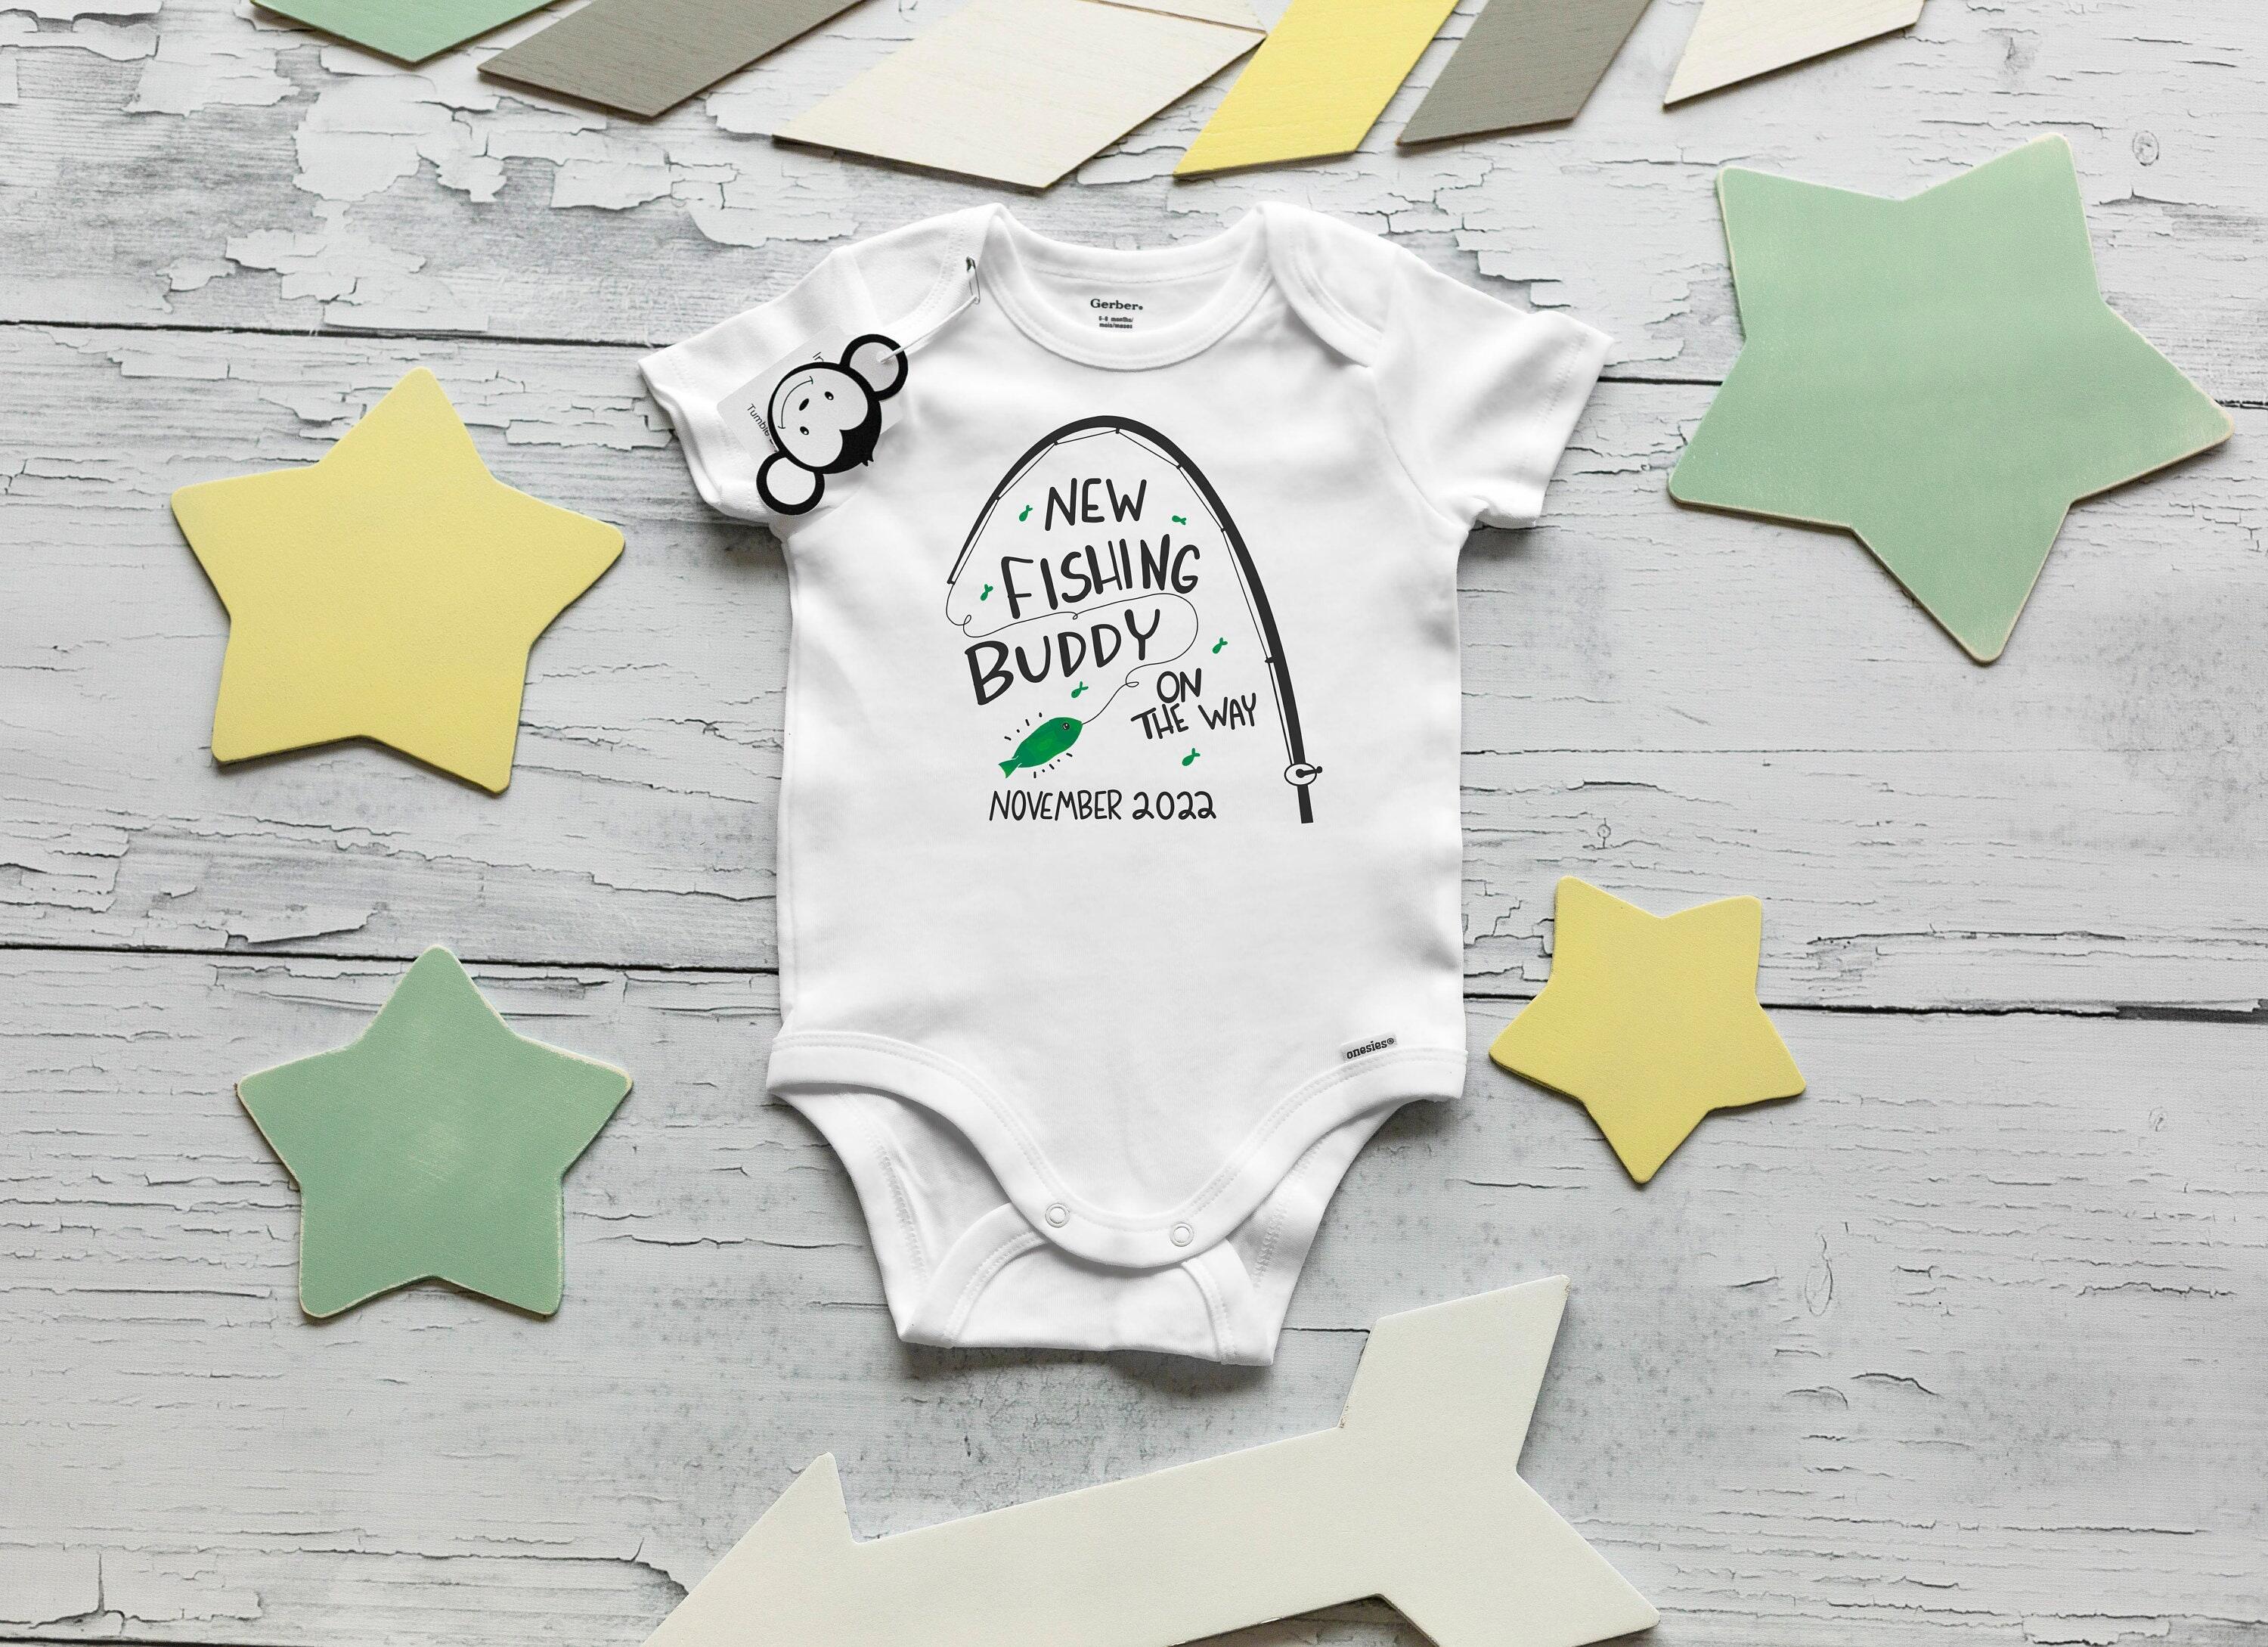 Clothing & Accessories :: Kids & Baby :: Baby Clothing :: New Fishing  Buddy, Pregnancy Announcement Onesie®, Baby Announcement, Fishing Buddy Coming  Soon Onesie®, Pregnancy Reveal to Grandparents